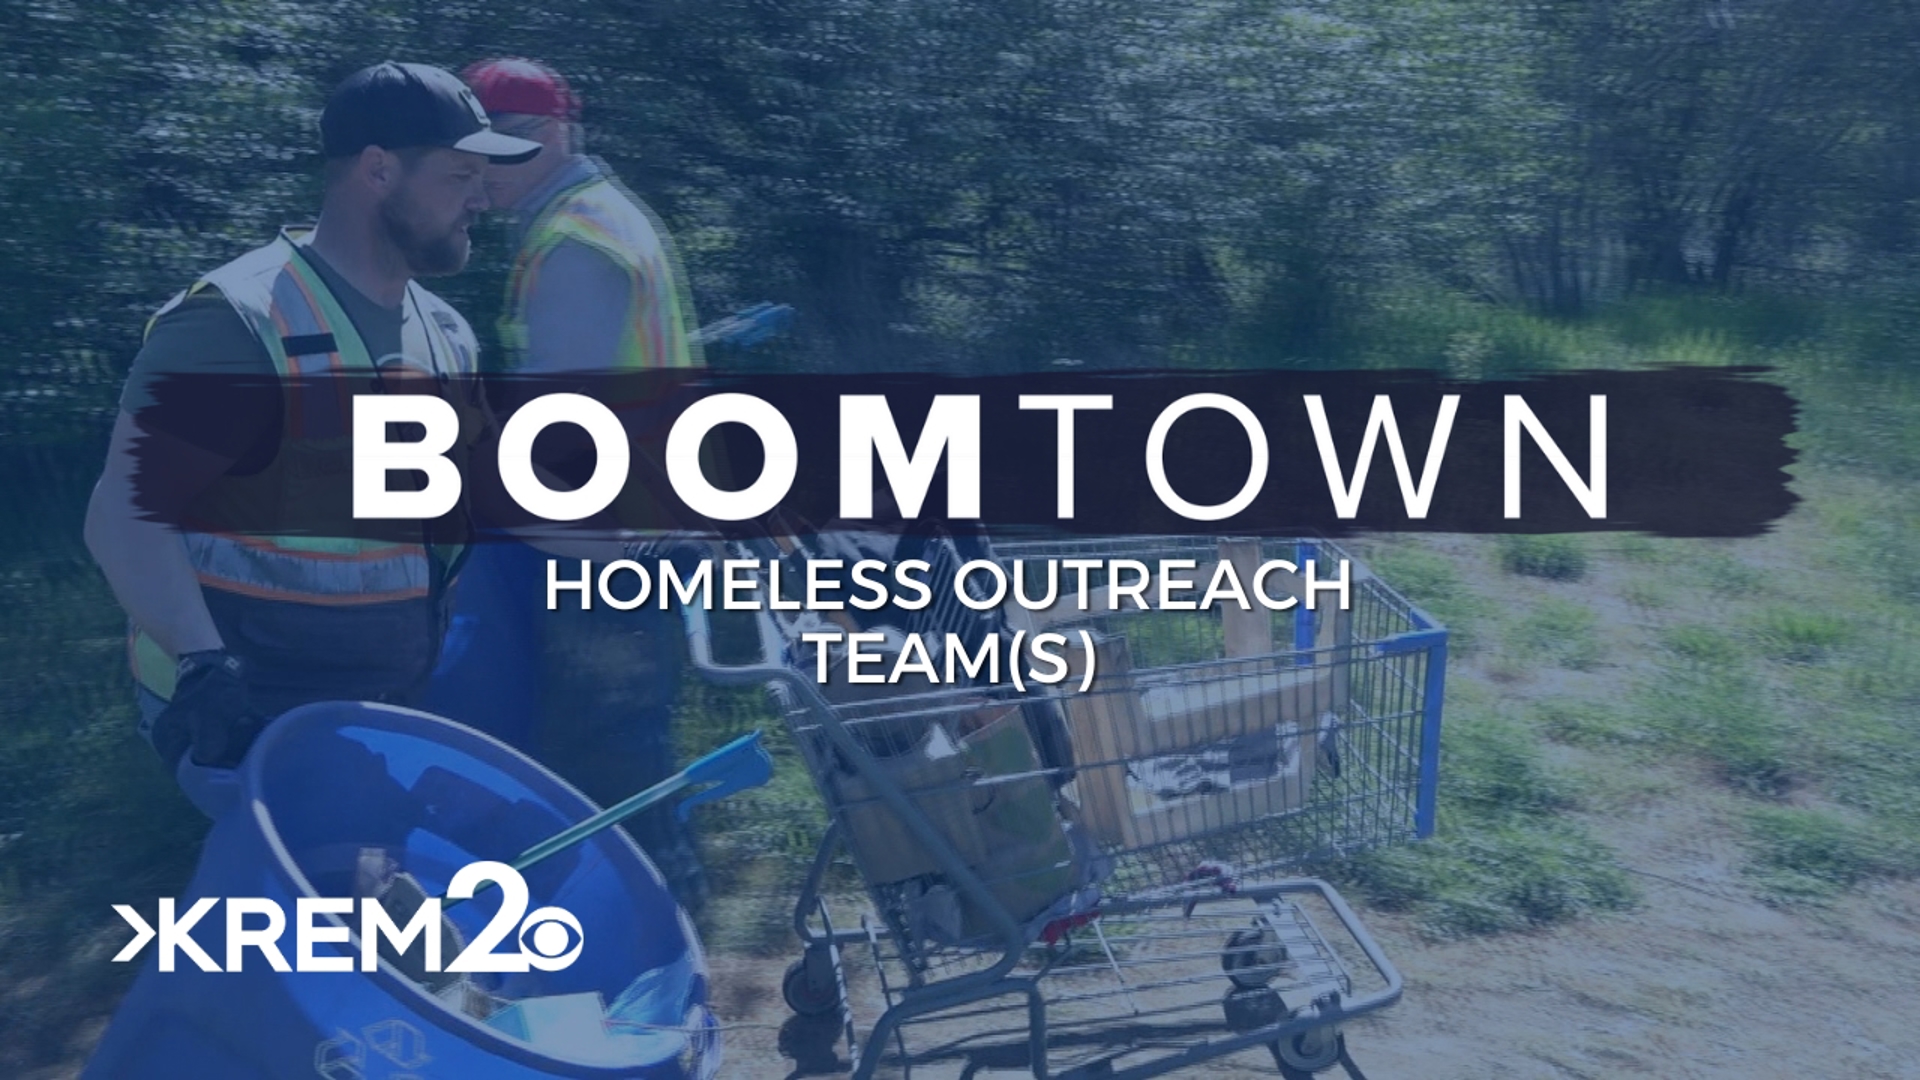 Last month, the city of Spokane expanded its Homeless Outreach Team (HOT) to improve and increase responses to complaints about illegal camping and other impacts.